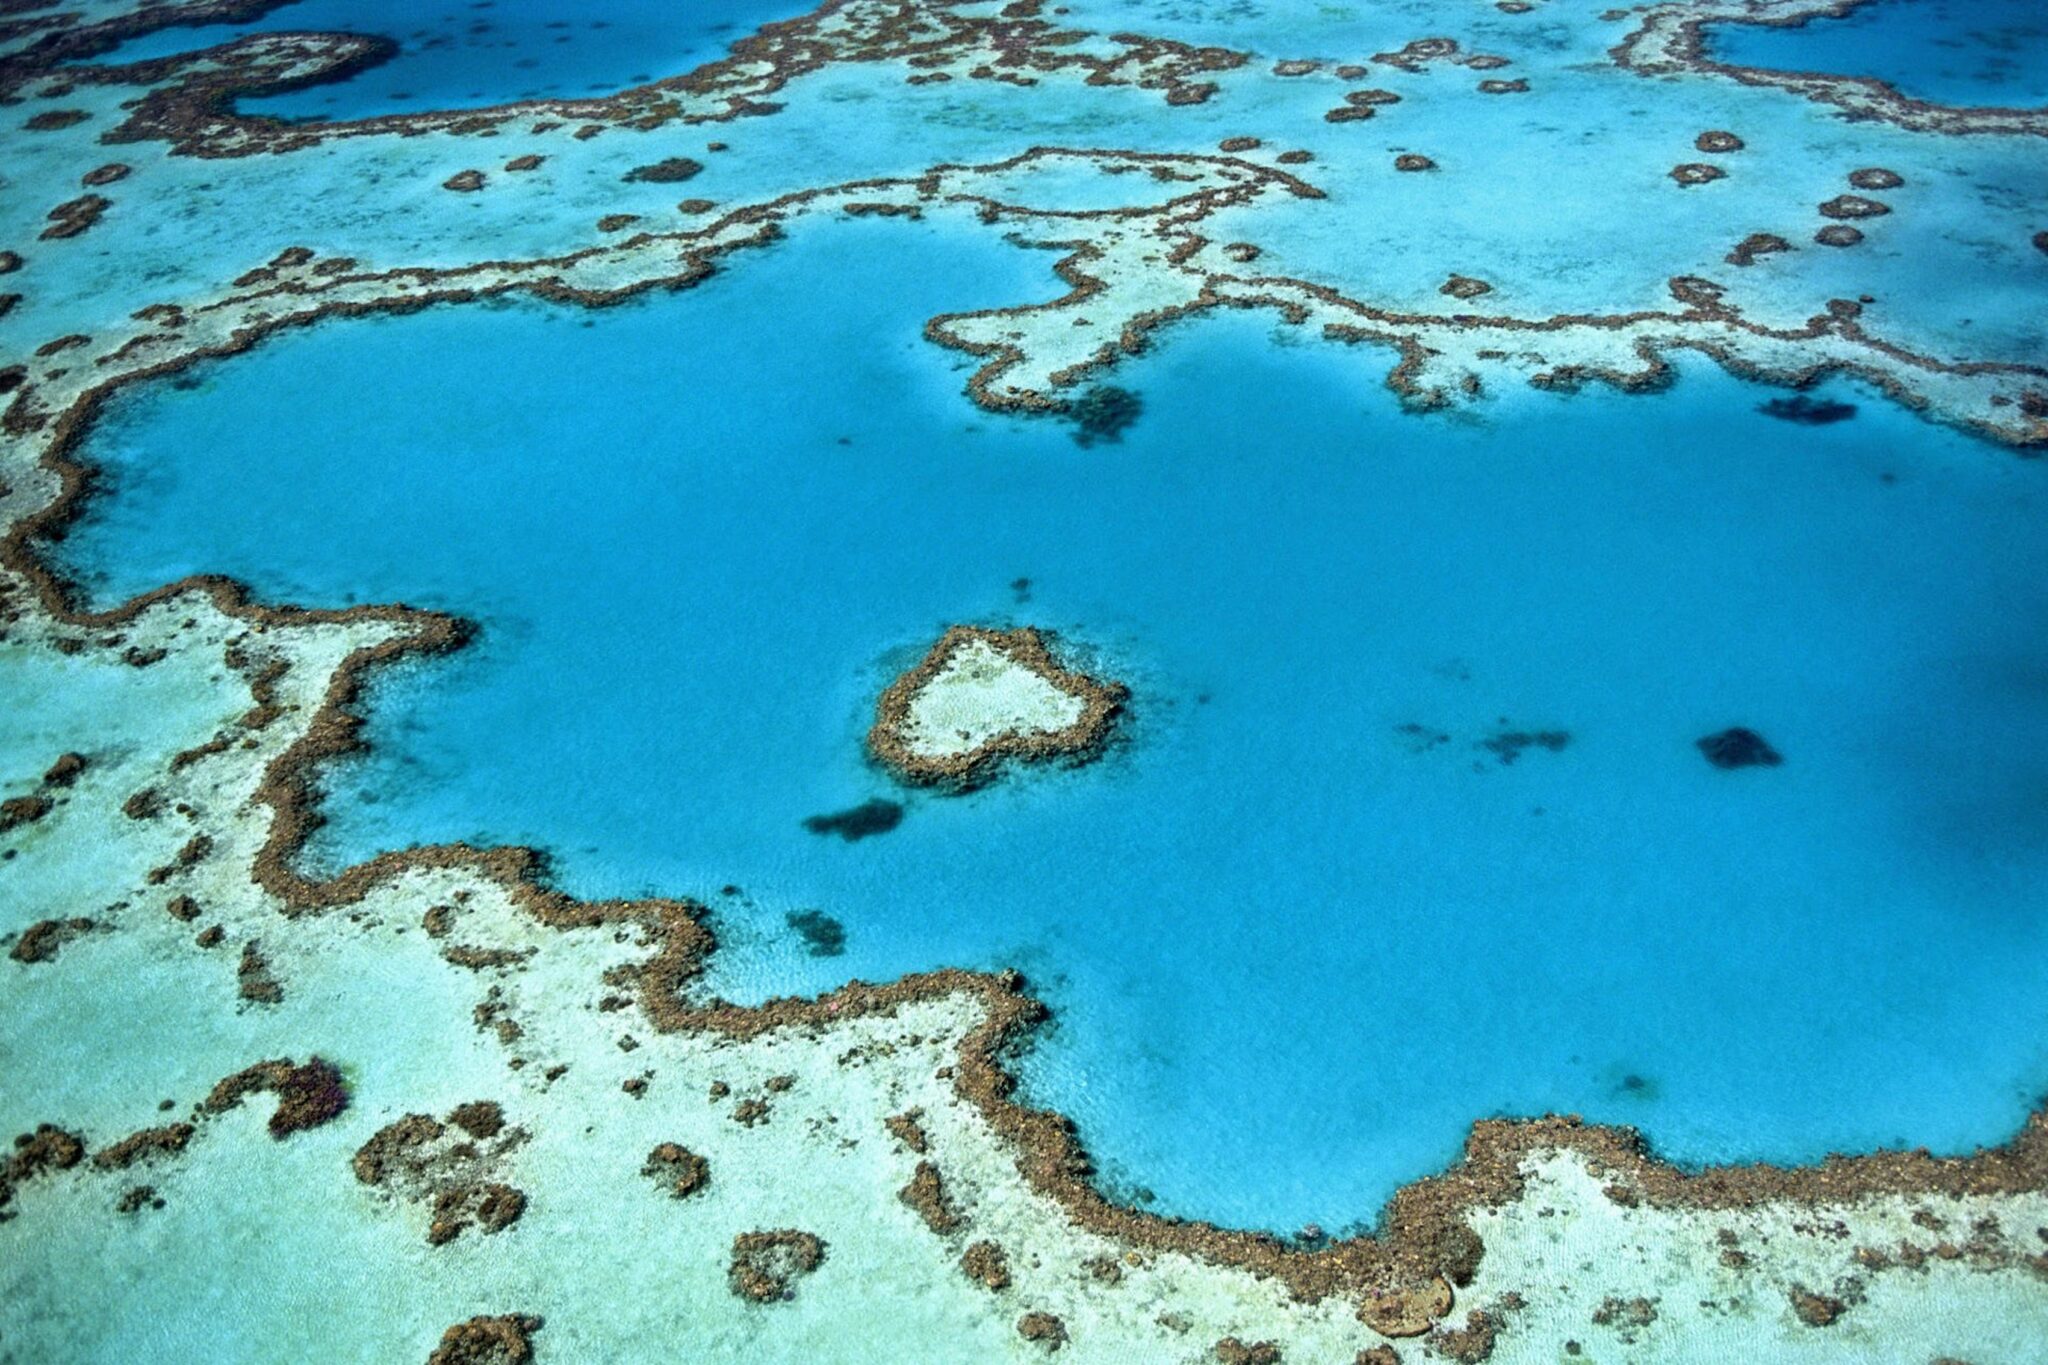 Part of the Great Barrier Reef from above. Credit: Yanguang Lan